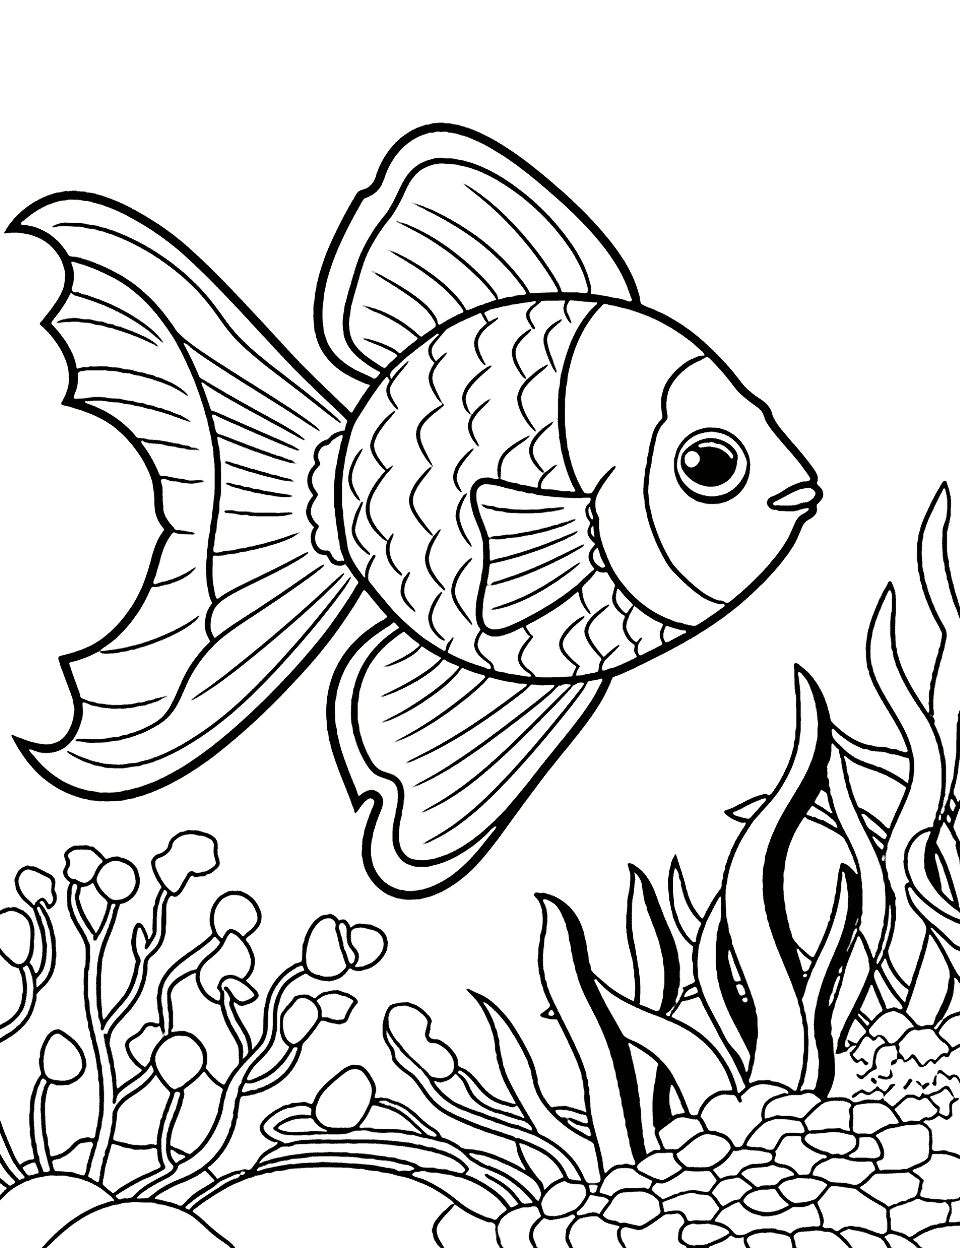 Colorful Tropical Fish Animal Coloring Page - A variety of colorful fish swimming among coral reefs in tropical waters.